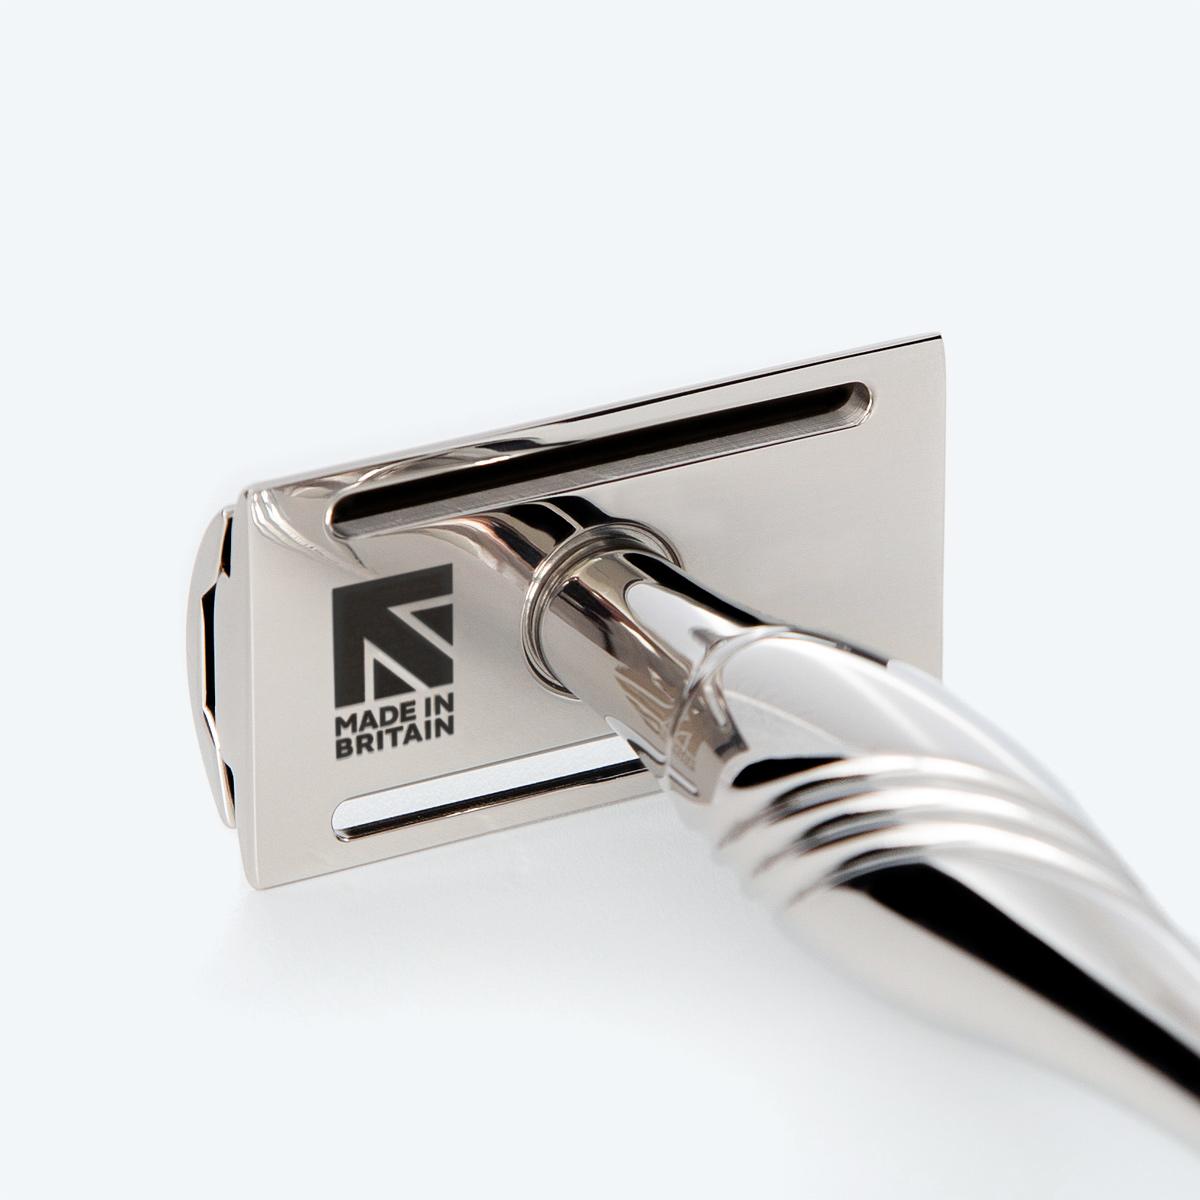 Apsley stainless steel safety razor made in UK